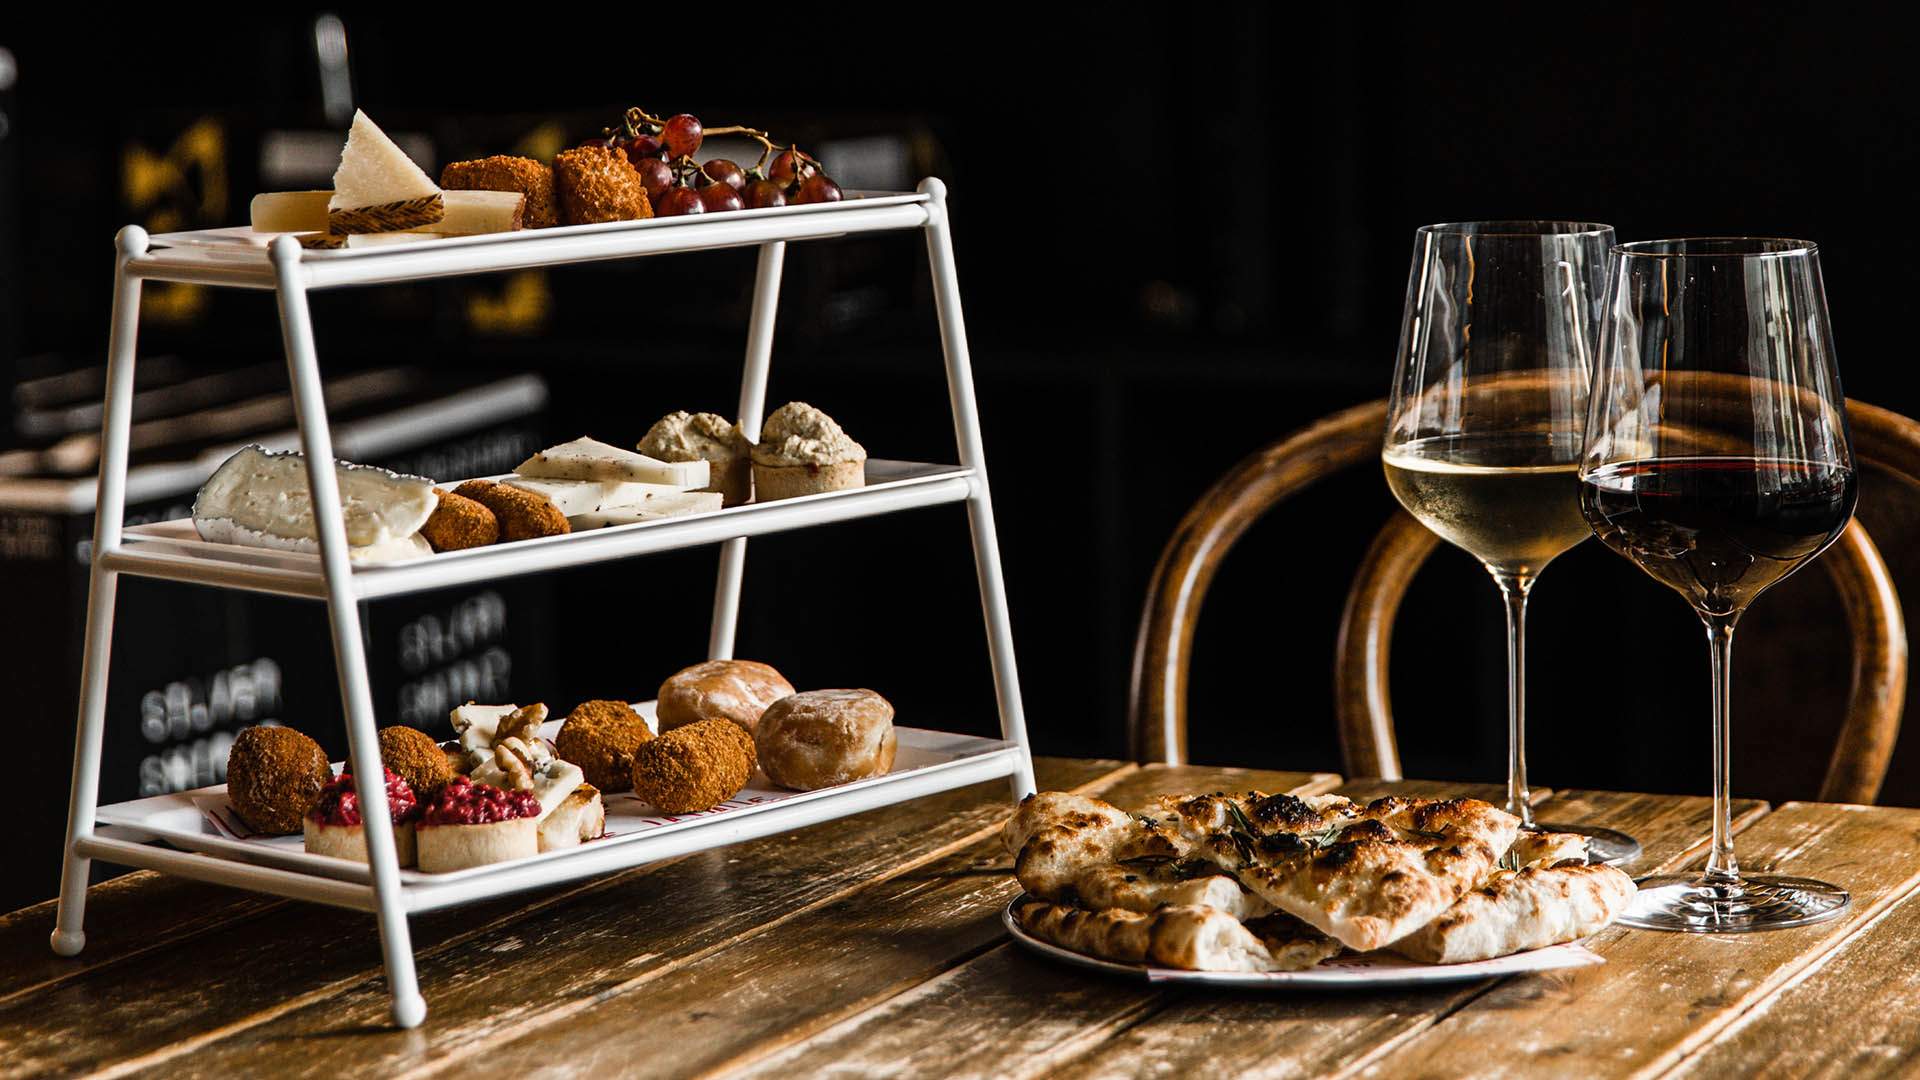 High Cheese and Bottomless Wine: Truffle Series